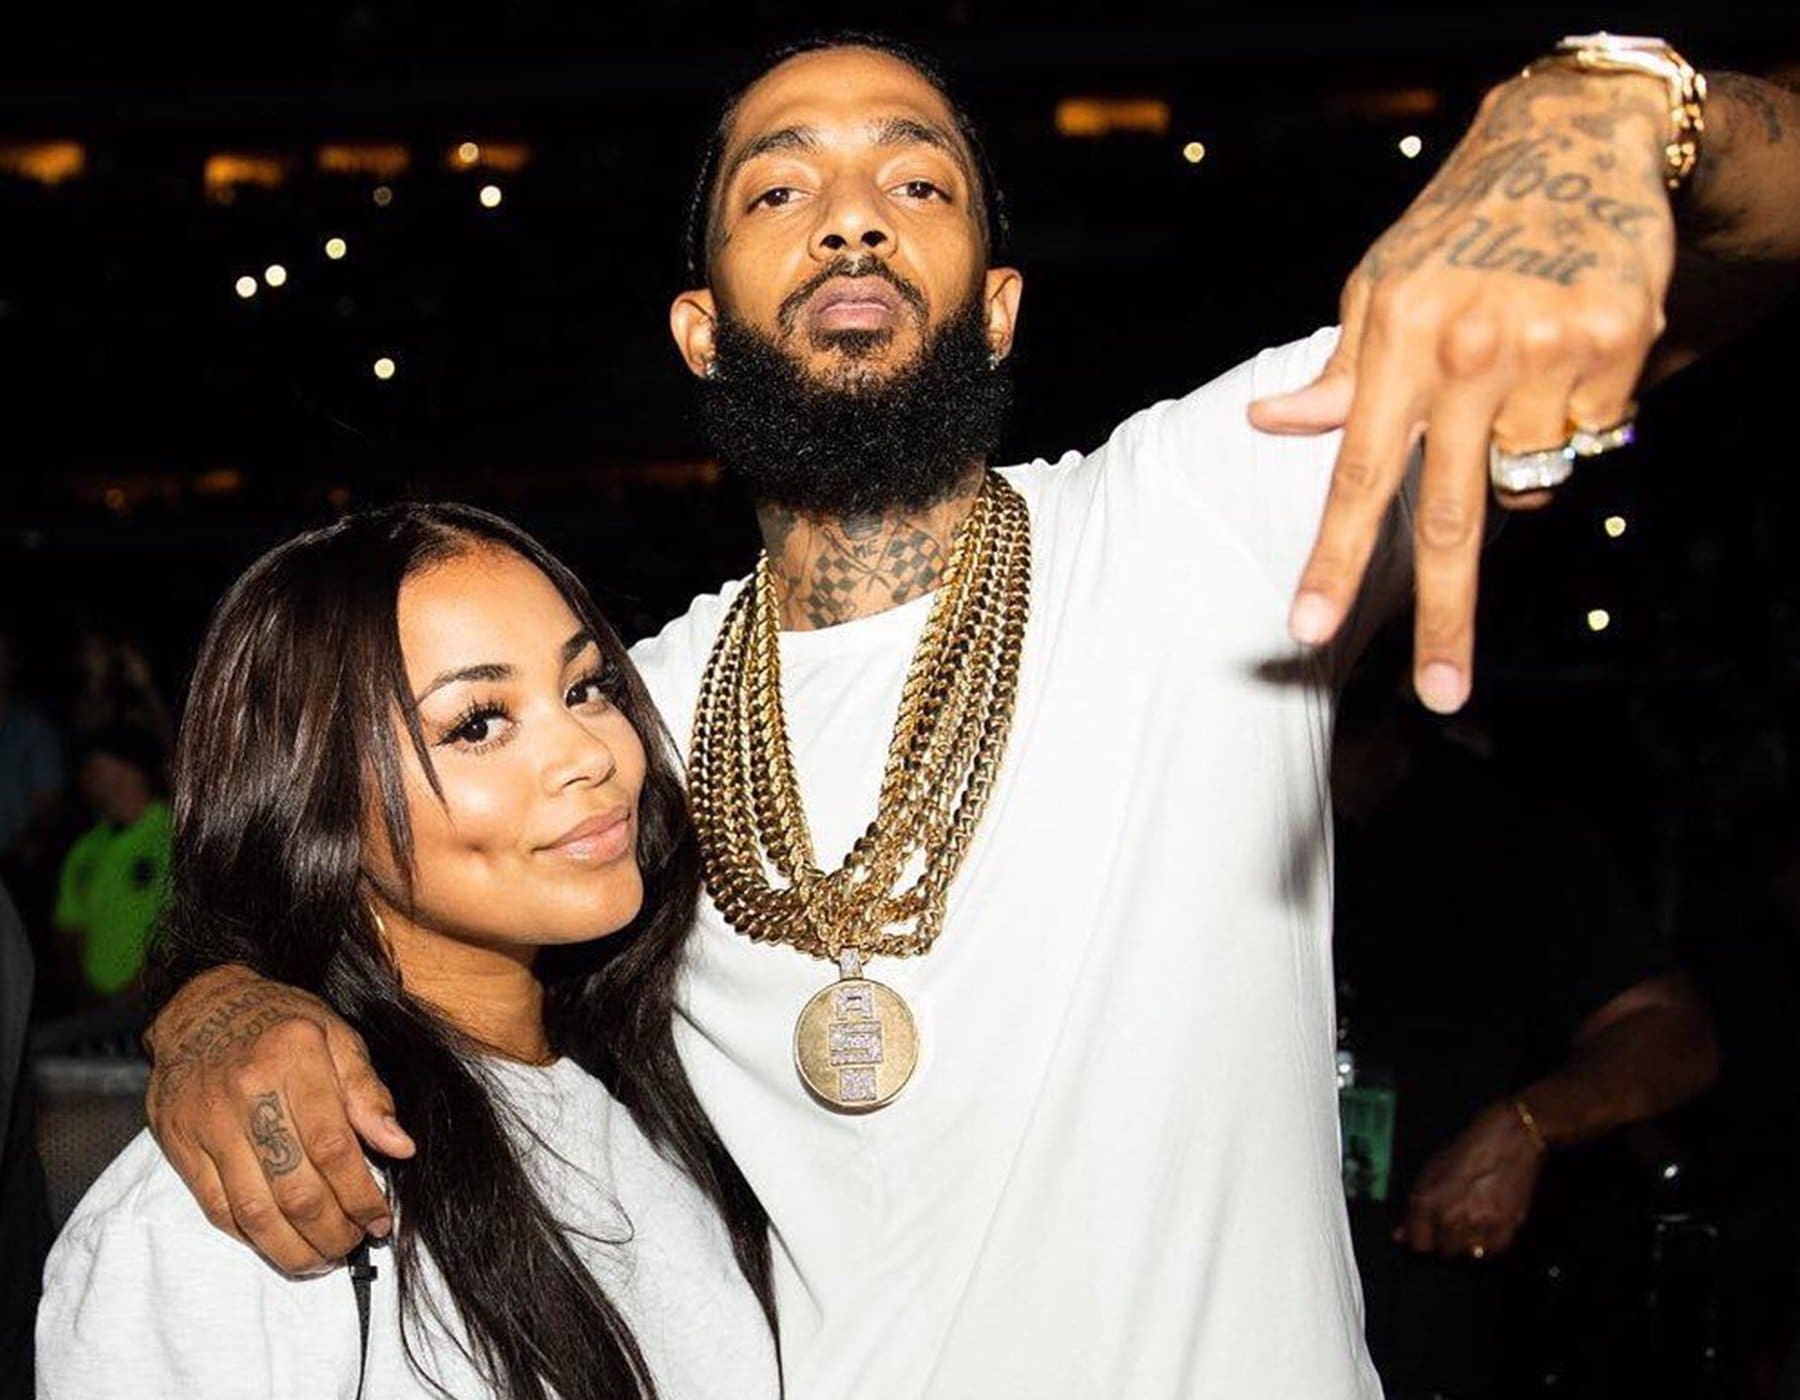 Lauren London Parties With Samantha Smith In Celebration Of The Late Nipsey Hussle - Fans Are Ecstatic To See Her Smiling Again - See The Videos